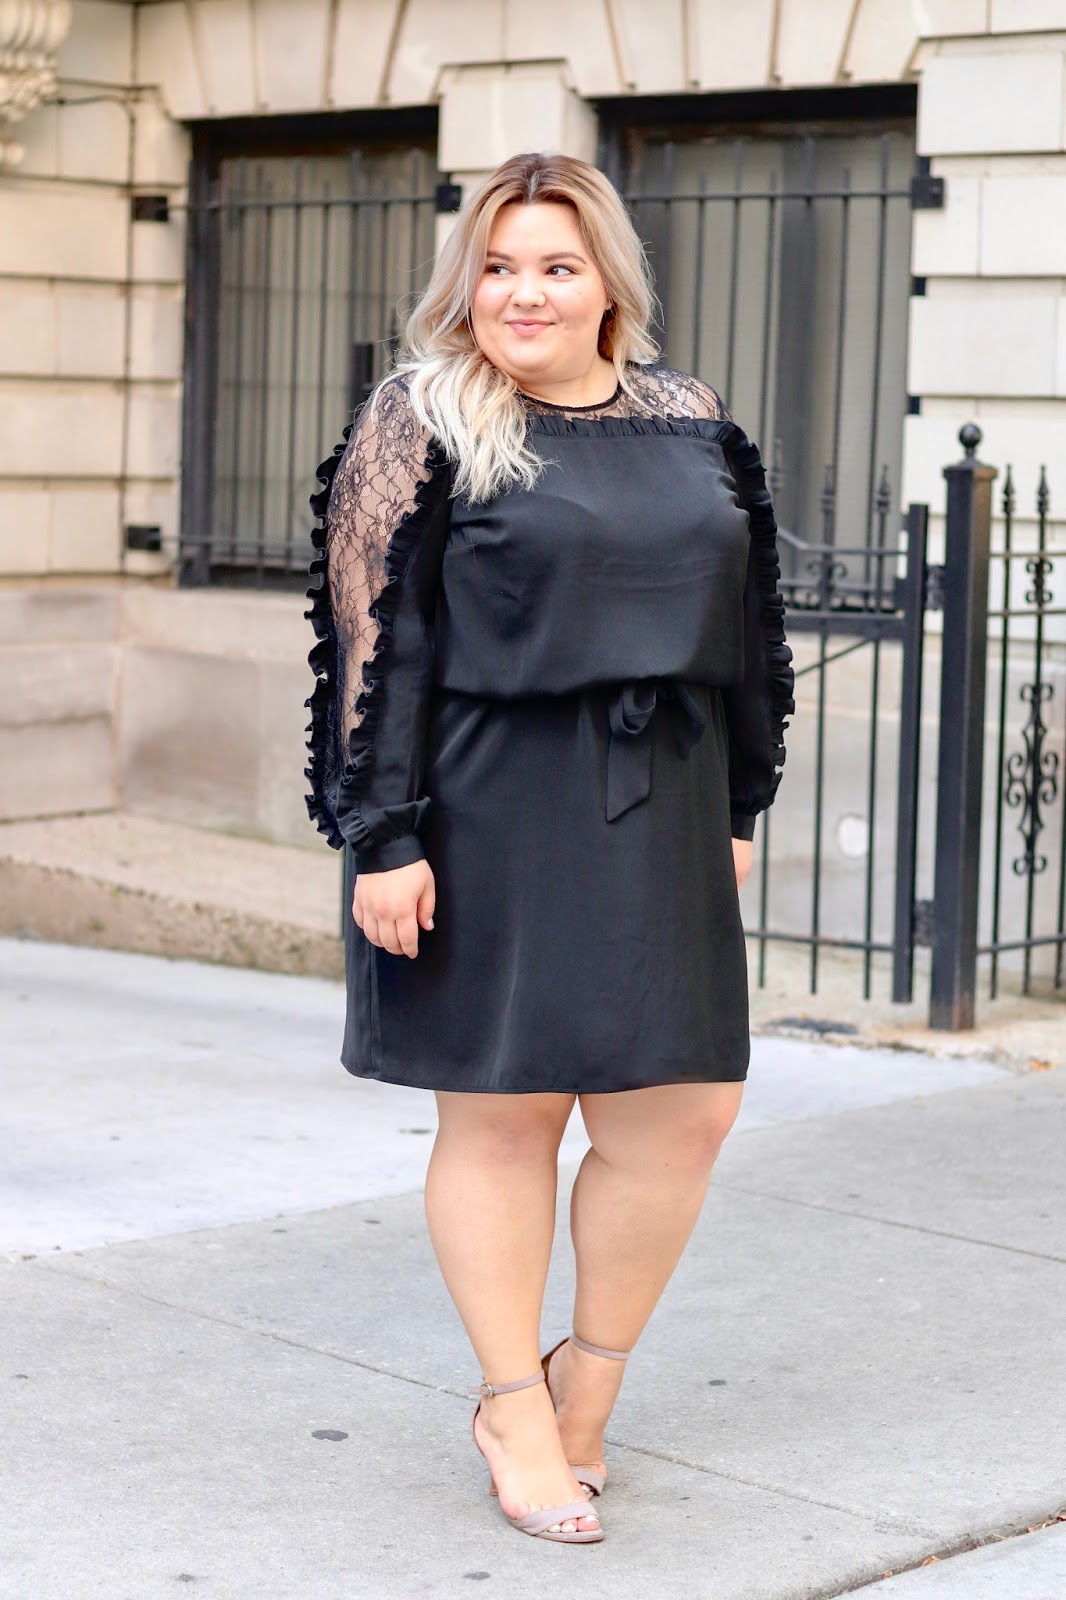 plus size fashion, plus size fashion blogger, Chicago blogger, natalie in the city, eloquii, the shops at Northbridge, eloquii Chicago, plus size dresses for work, plus size office outfits, affordable plus size clothing, curves and confidence, fatshion